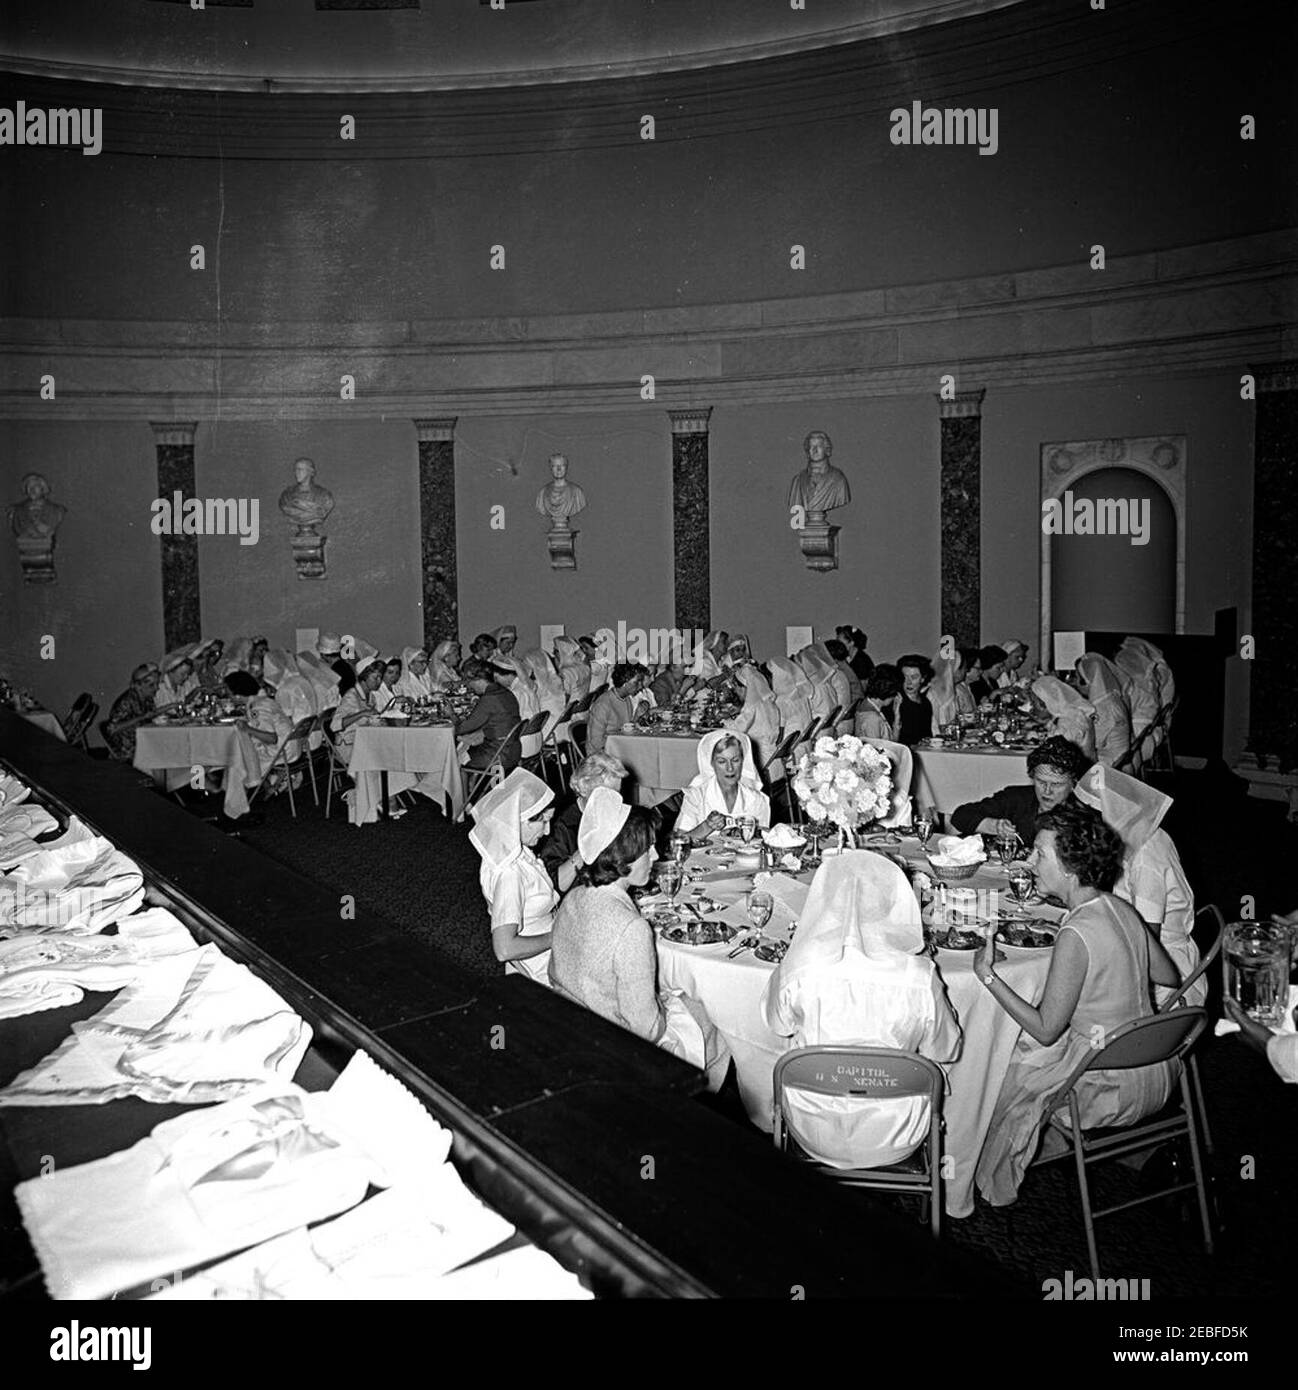 First Lady Jacqueline Kennedy (JBK) attends the Senate Ladies Red Cross Unit Luncheon. First Lady Jacqueline Kennedy, Lady Bird Johnson, and members of the Senate Ladies Red Cross Unit attend a luncheon in the Old Supreme Court Chamber, United States Capitol Building, Washington, D.C. The Red Cross unit (also known as u201cLadies of the Senateu201d) is comprised of the wives of members of the US Senate. Stock Photo